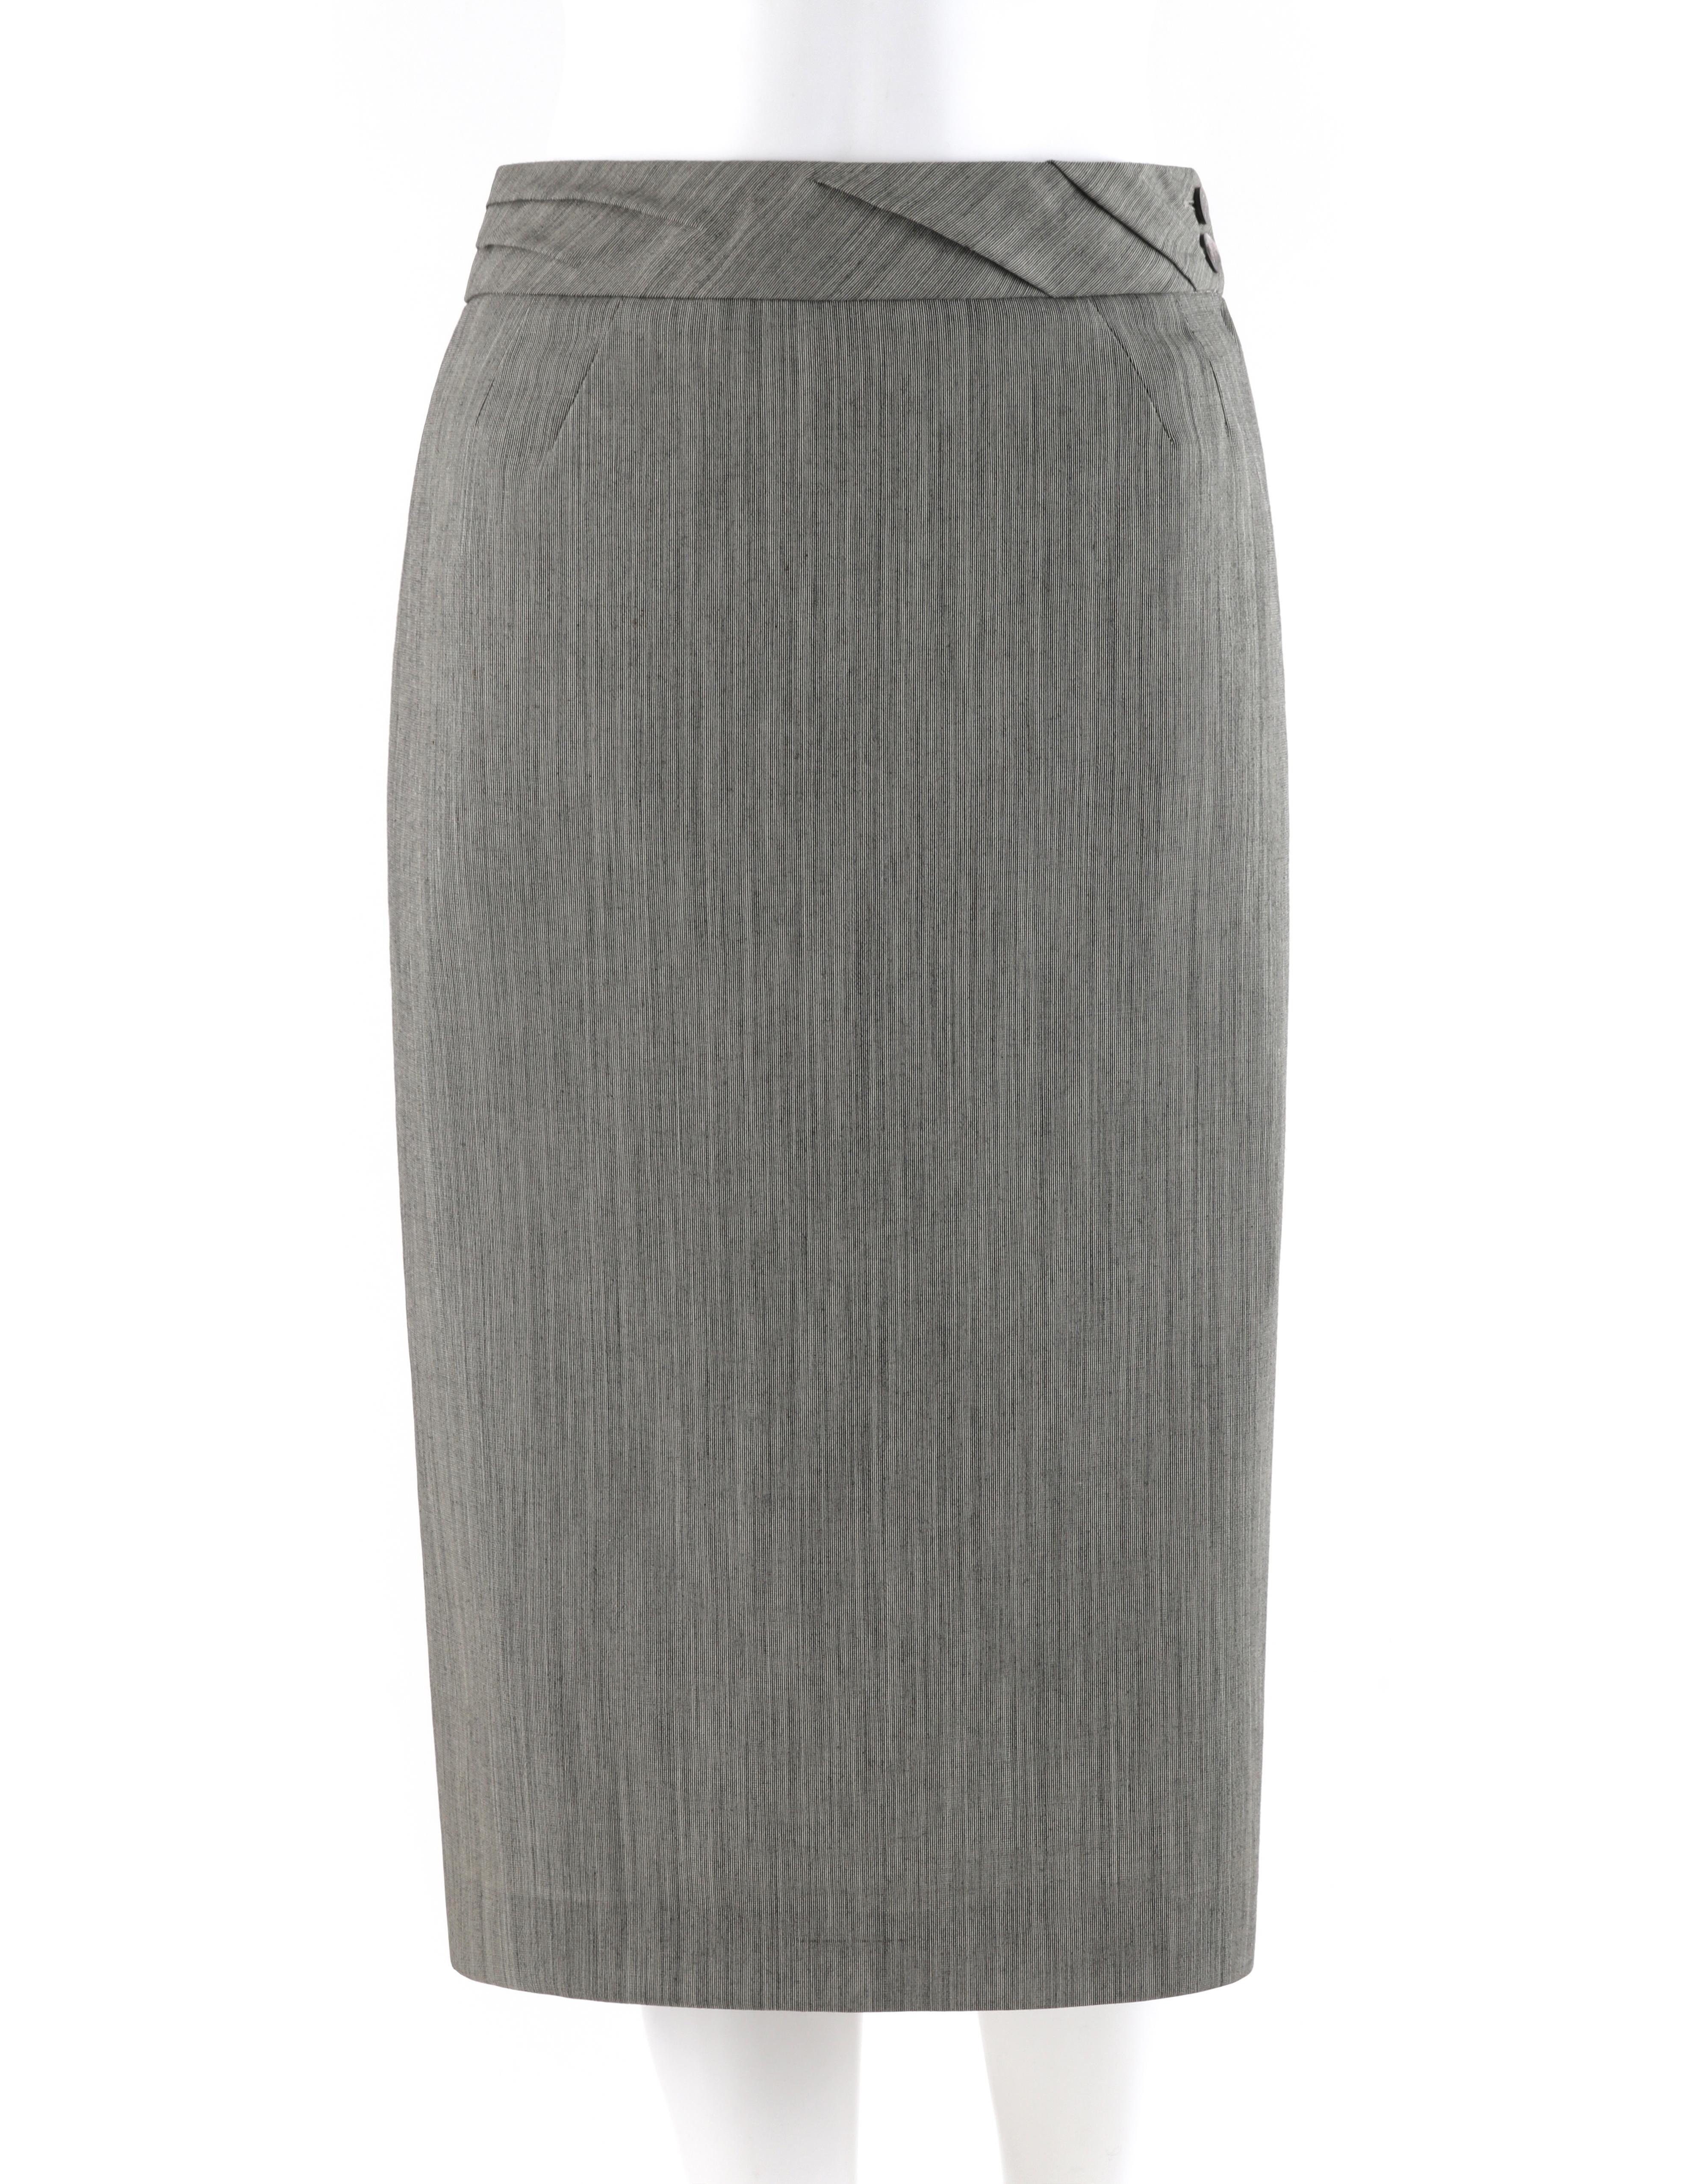 ALEXANDER McQUEEN S/S 1999 “No. 13” Micro Striped Pleat Waistband Pencil Skirt

Brand / Manufacturer: Alexander McQueen
Collection: S/S 1999 “No. 13”
Designer: Alexander McQueen
Style: Pencil skirt
Color(s): Shades of black, gray and white; light